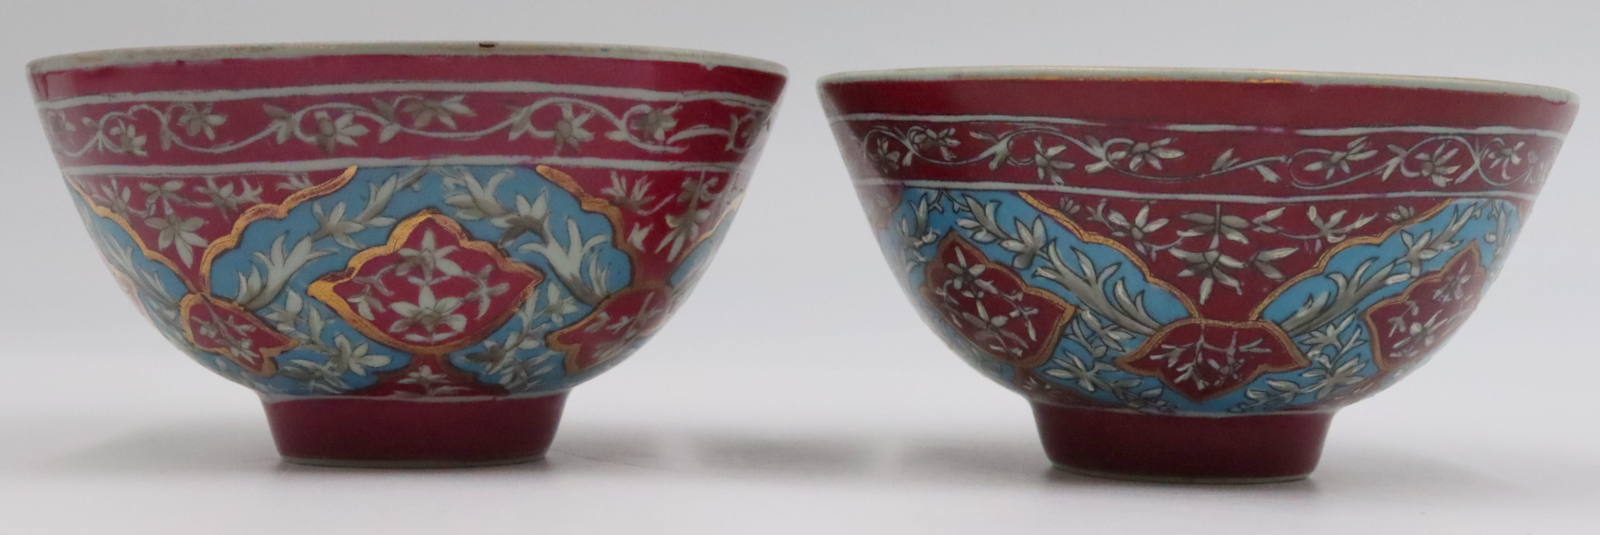 PAIR OF ENAMEL AND GILT DECORATED 3be2fb